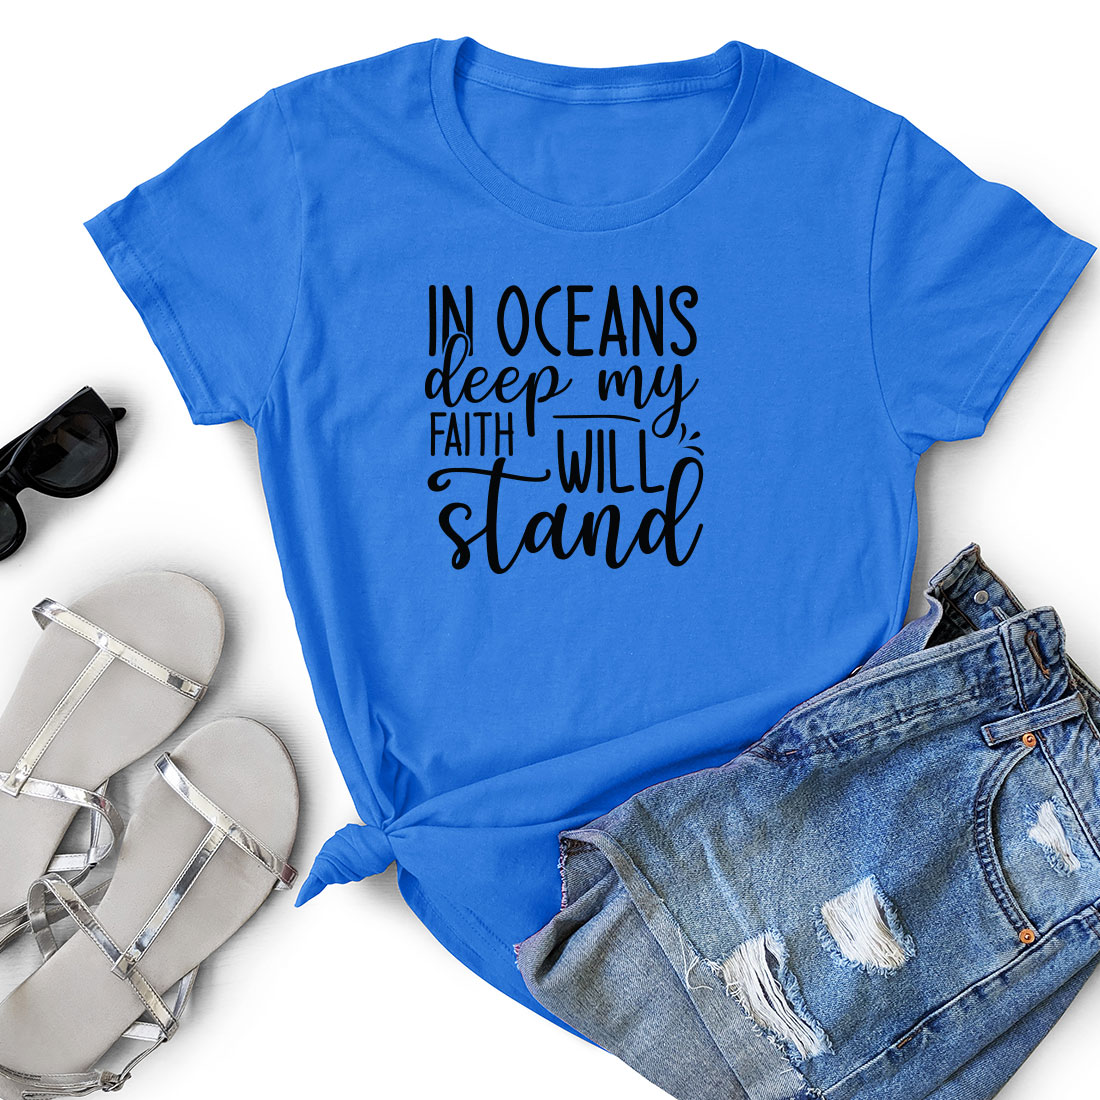 T - shirt that says in oceans deep my faith will stand.